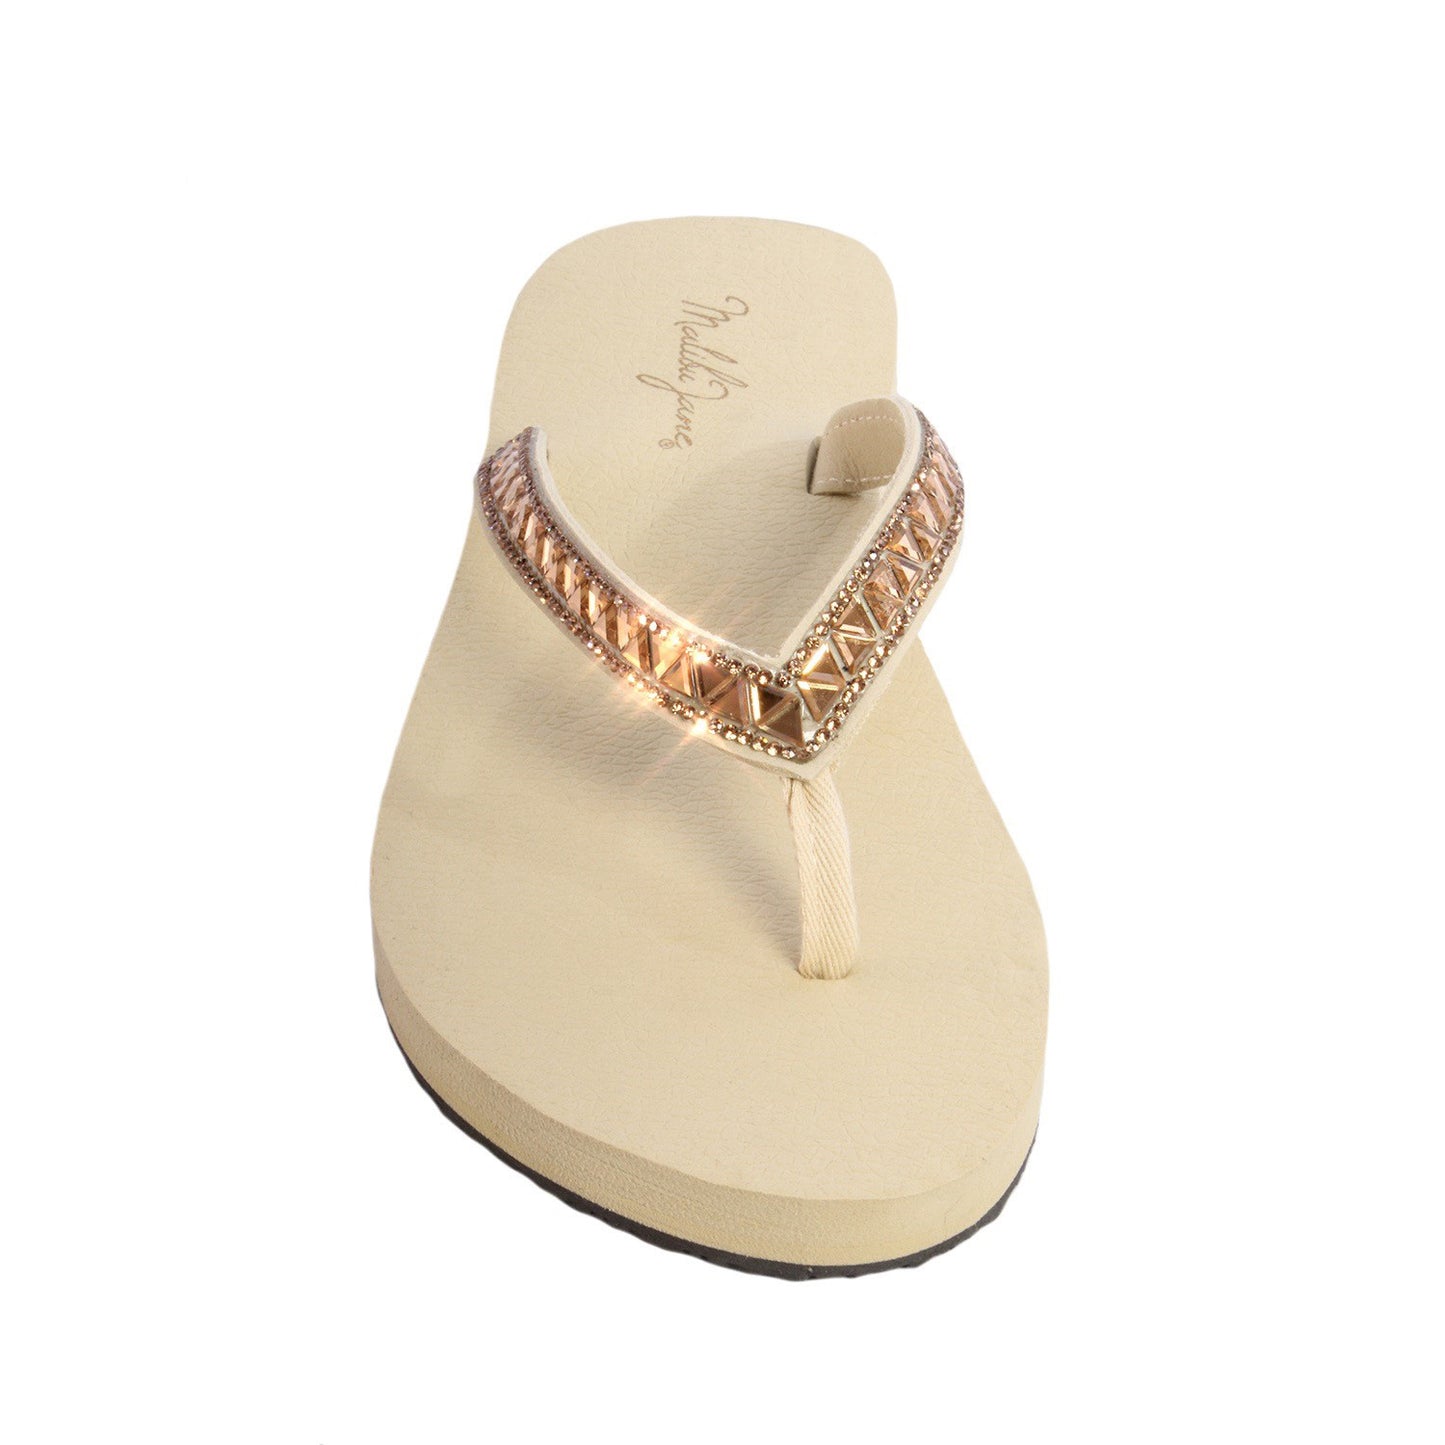 Bel Air Pharoh Nude with Gold Crystal Strap